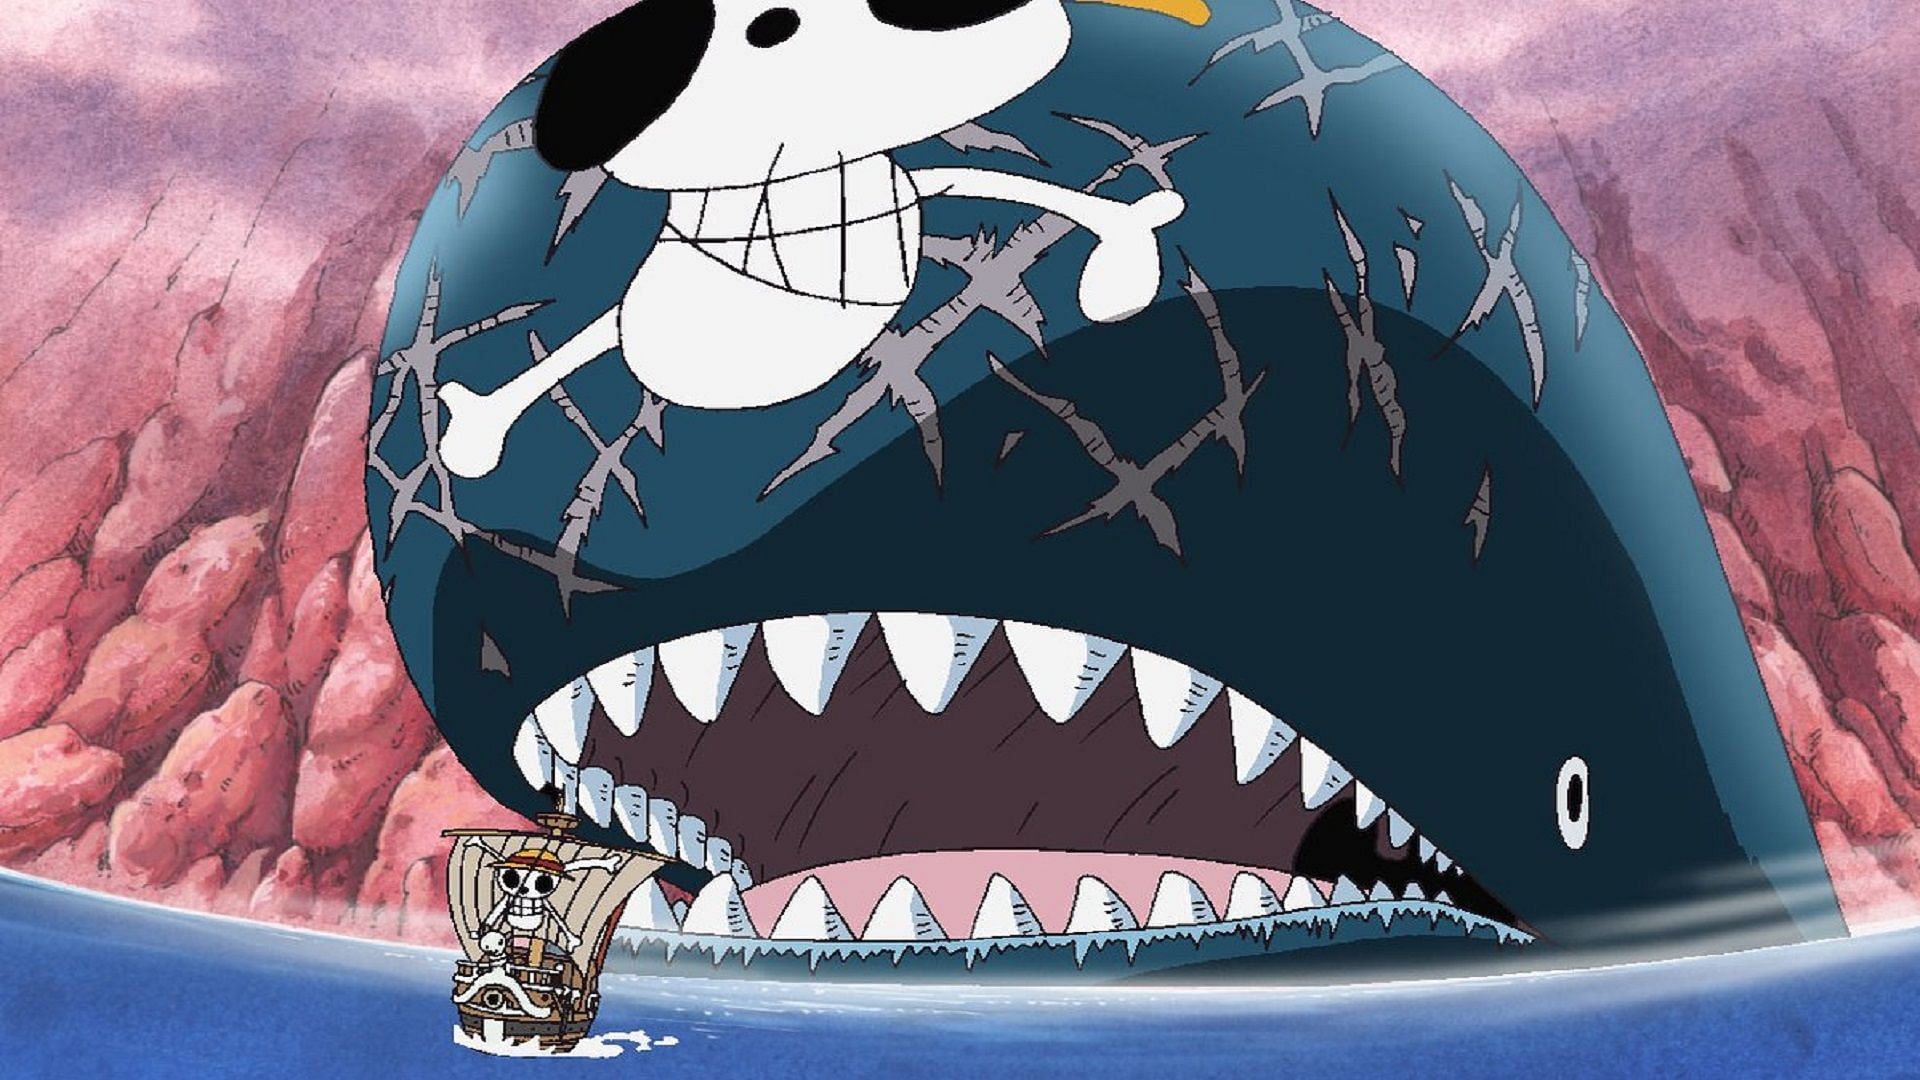 When they were about to enter the Grand Line, the Strawhat Pirates met Laboon (Image via Toei Animation, One Piece)